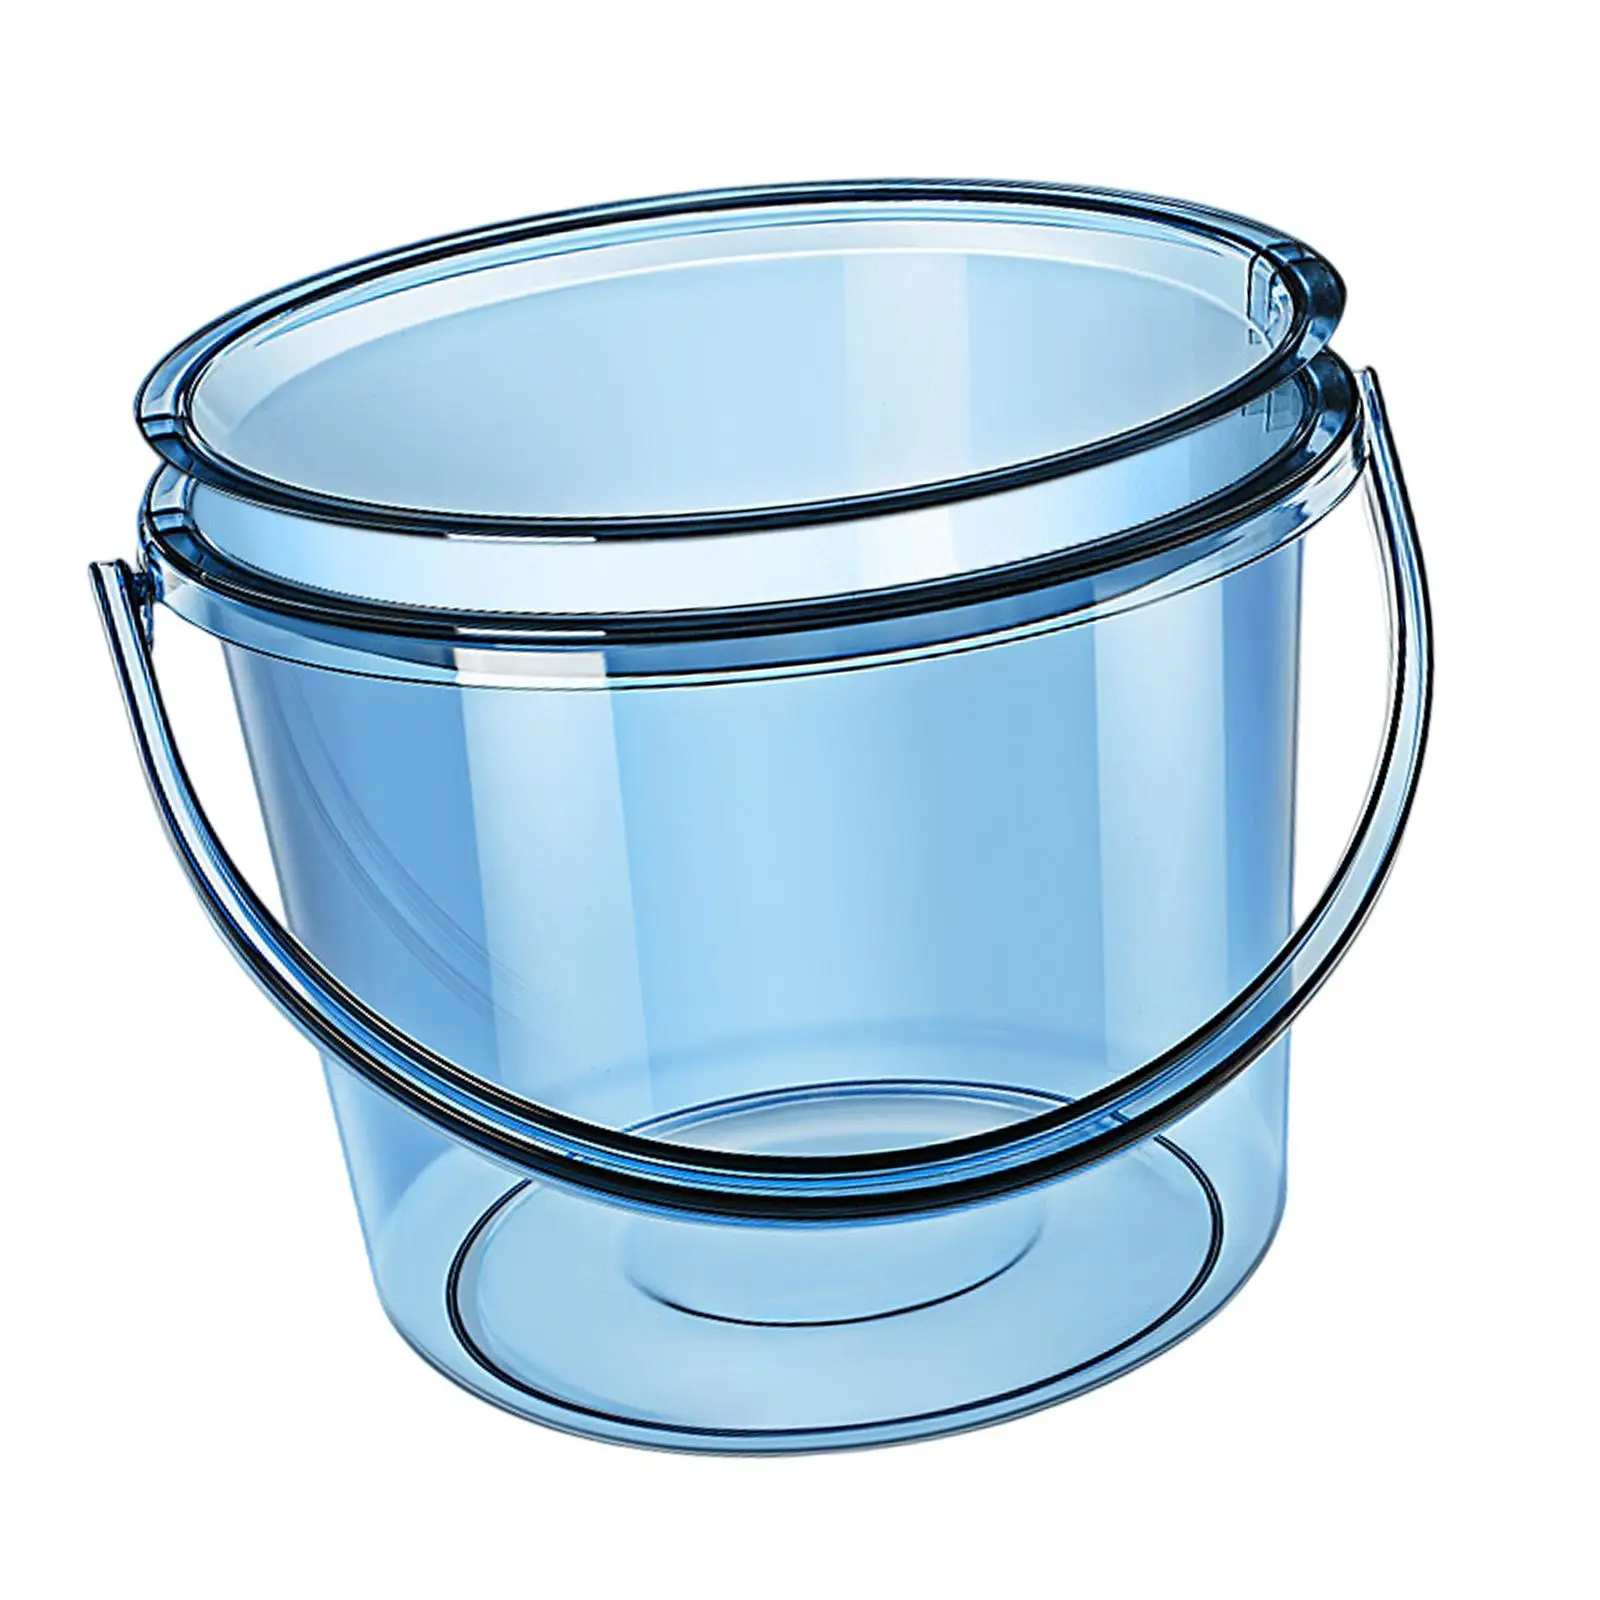 Water Bucket with Lid Small Bathing Household Bucket Cleaning Bucket for Household Use for Dormitory Car Washing Camping Outdoor